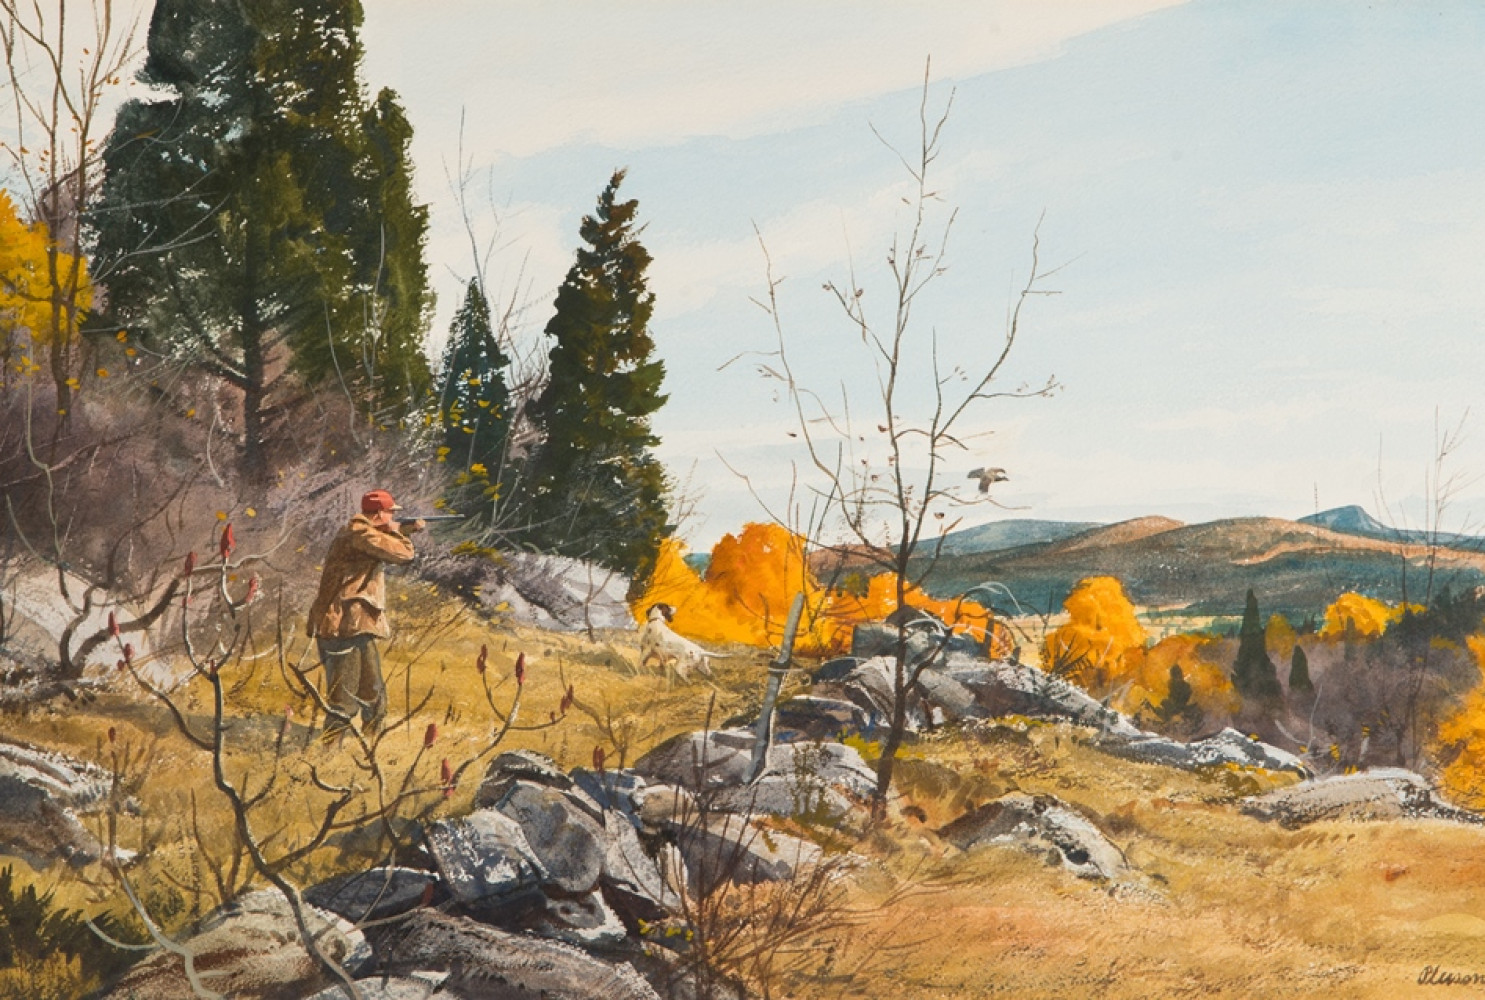 Vermont Hills, 1964, By Ogden M. Pleissner (American, 1905—1983); Watercolor on paper; 10 x 7 inches; Collection of Shelburne Museum, gift of Morton Quantrell. 1996-42.16. Photography by Andy Duback.